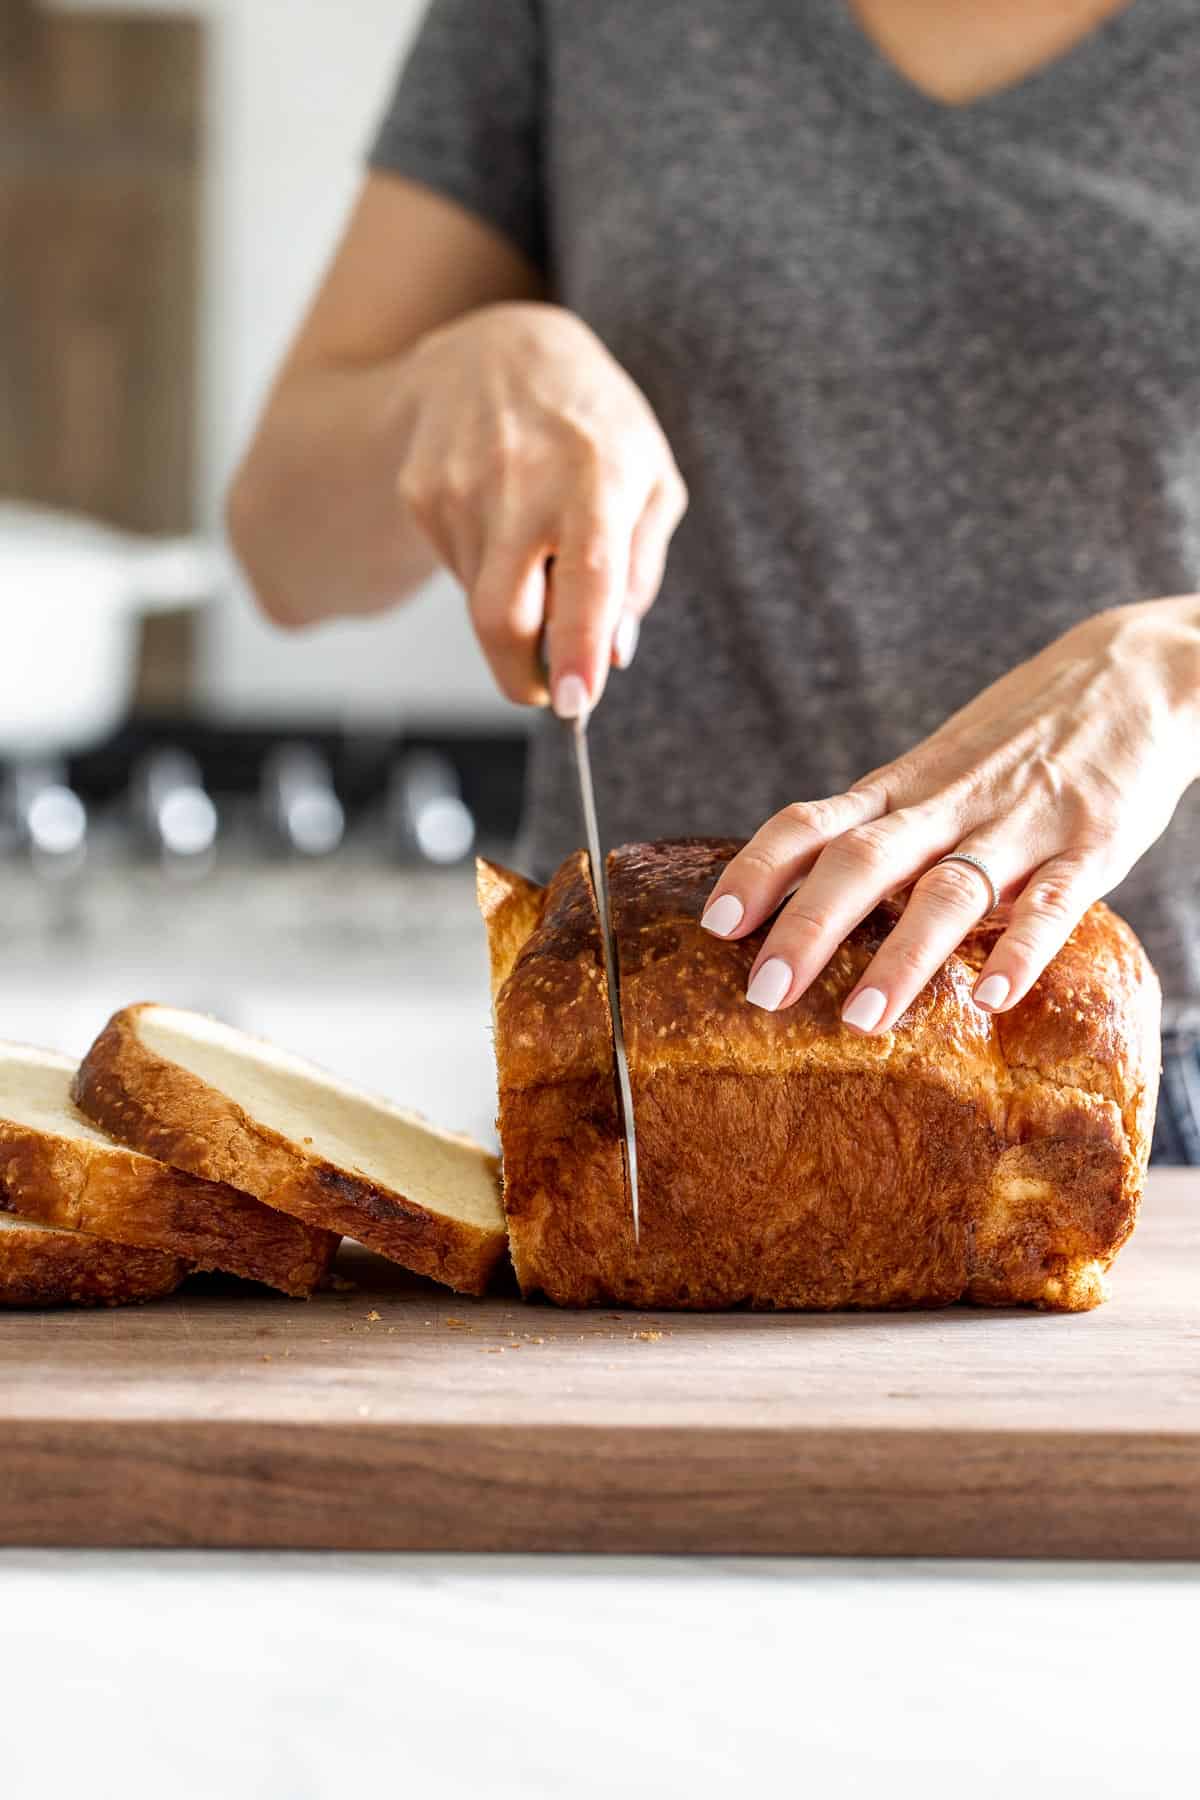 Person slicing brioche bread from the front view